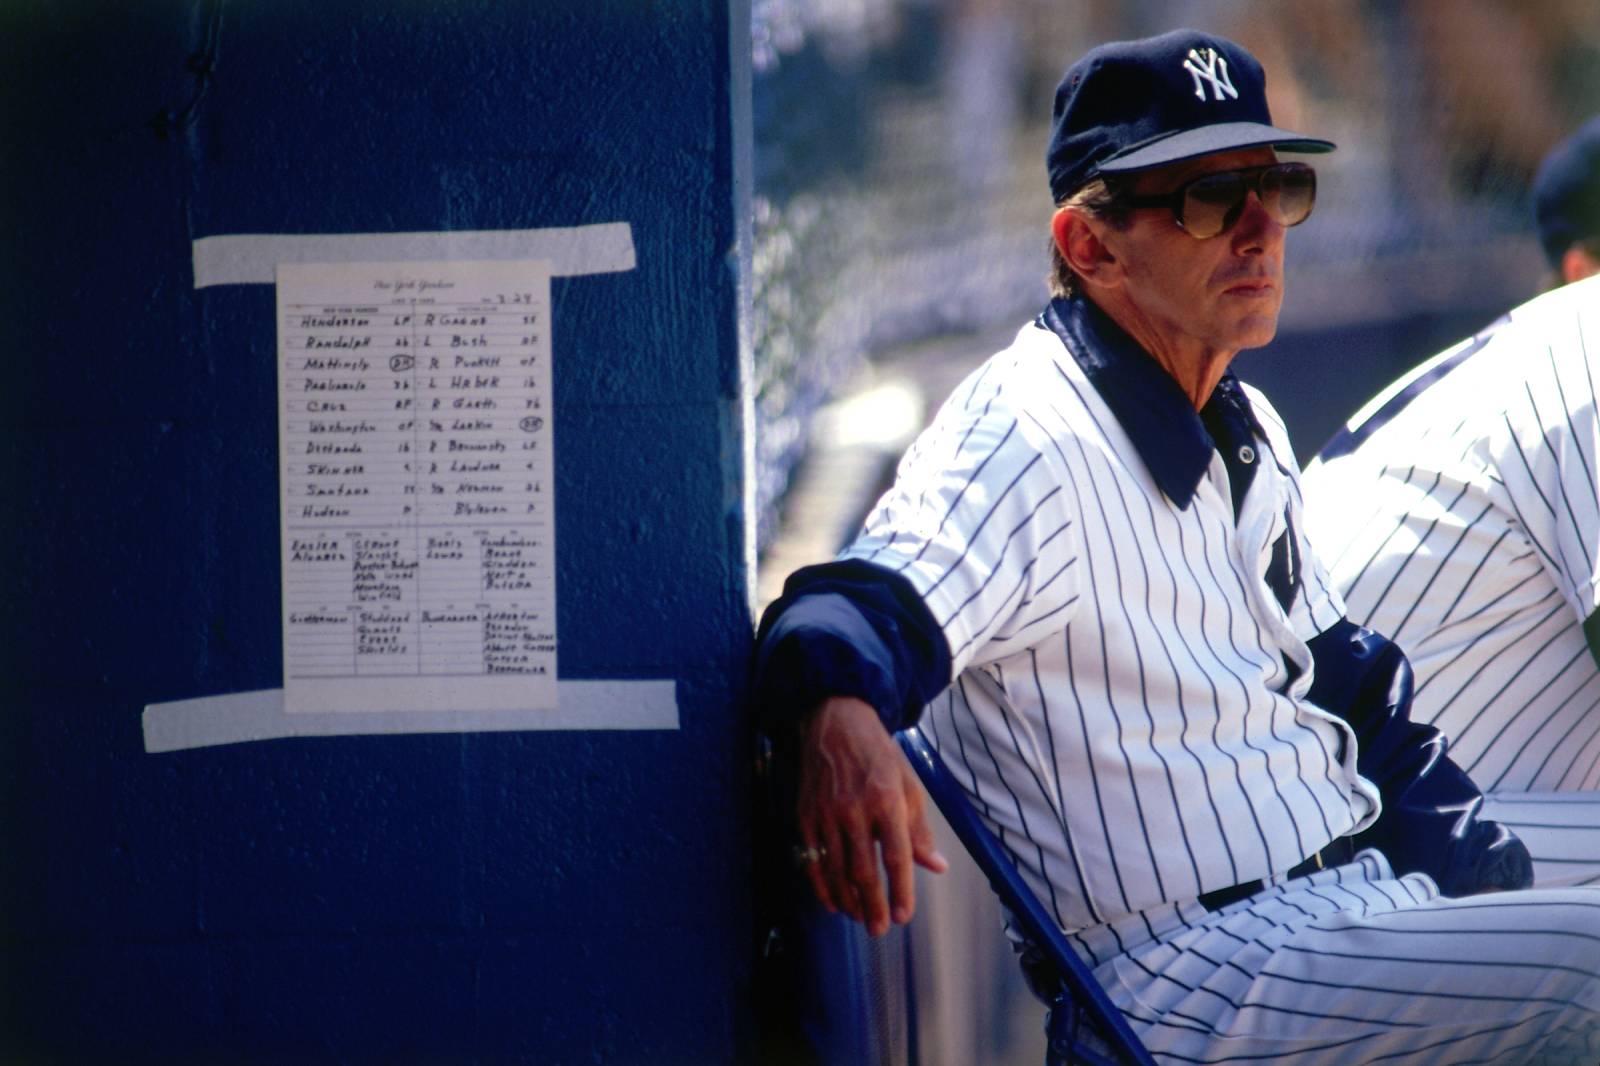 Baseball history may have changed when Yankees legend Billy Martin died in a car accident on Christmas Day 1989.